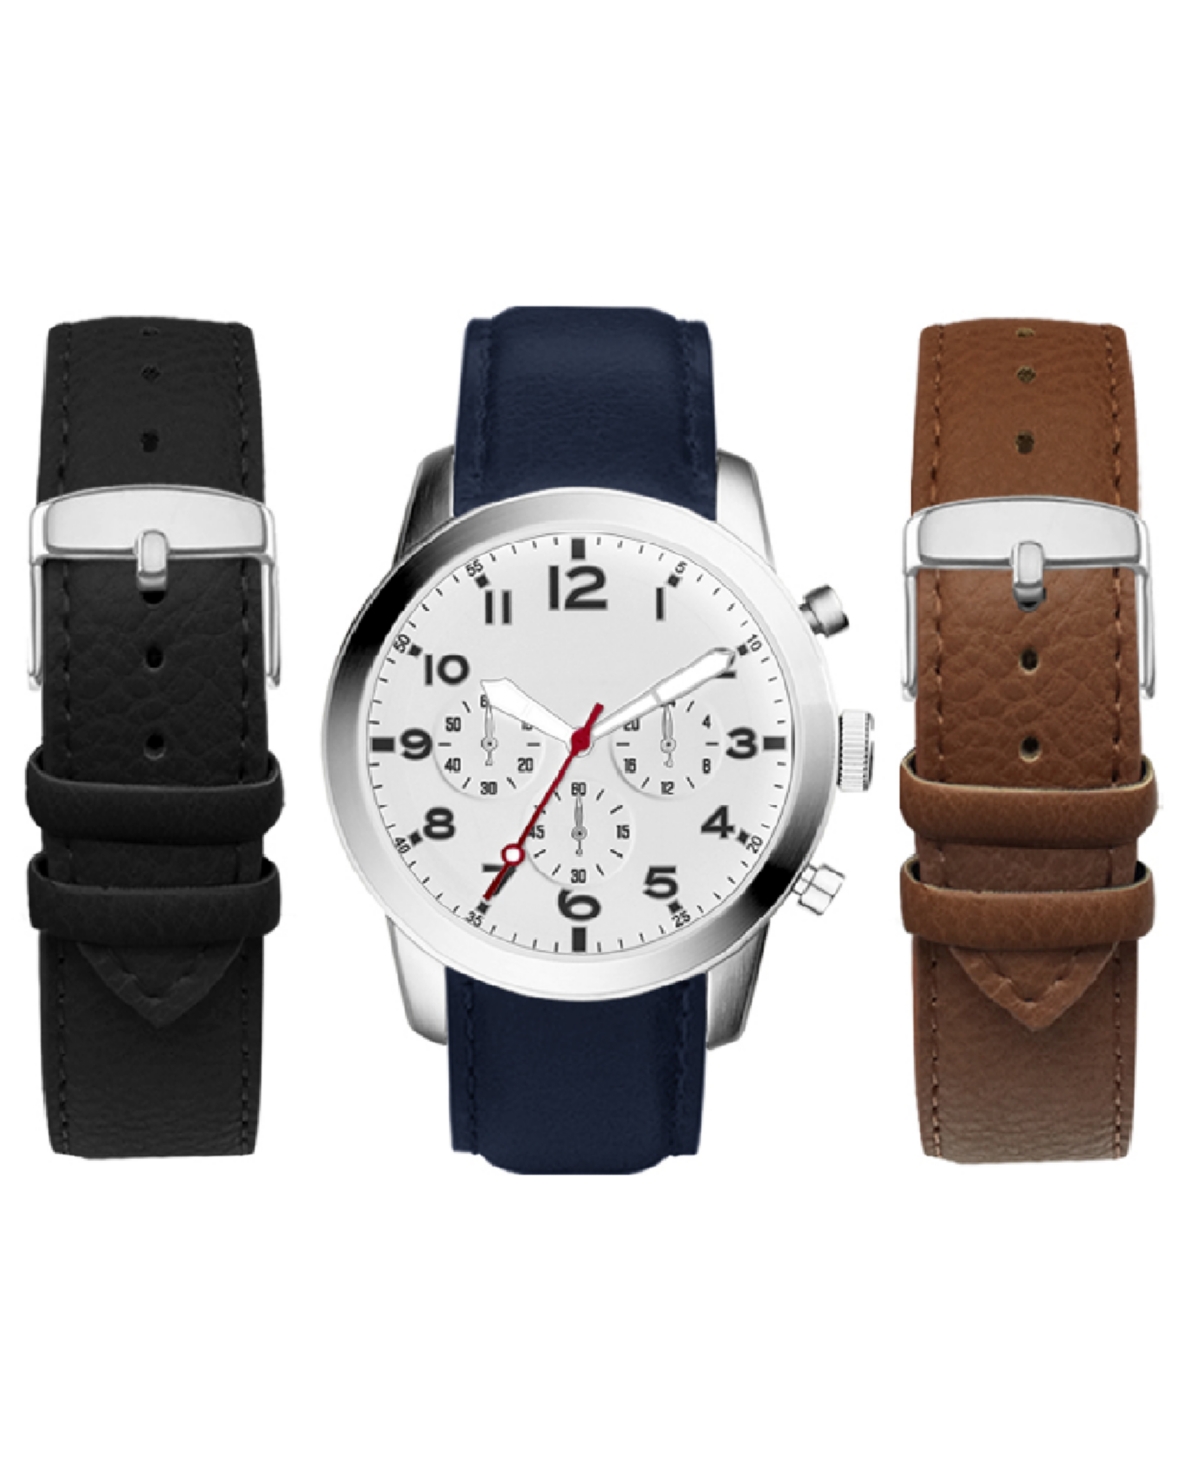 Men's Navy Leather Strap Watch 44mm Gift Set - Multicolor